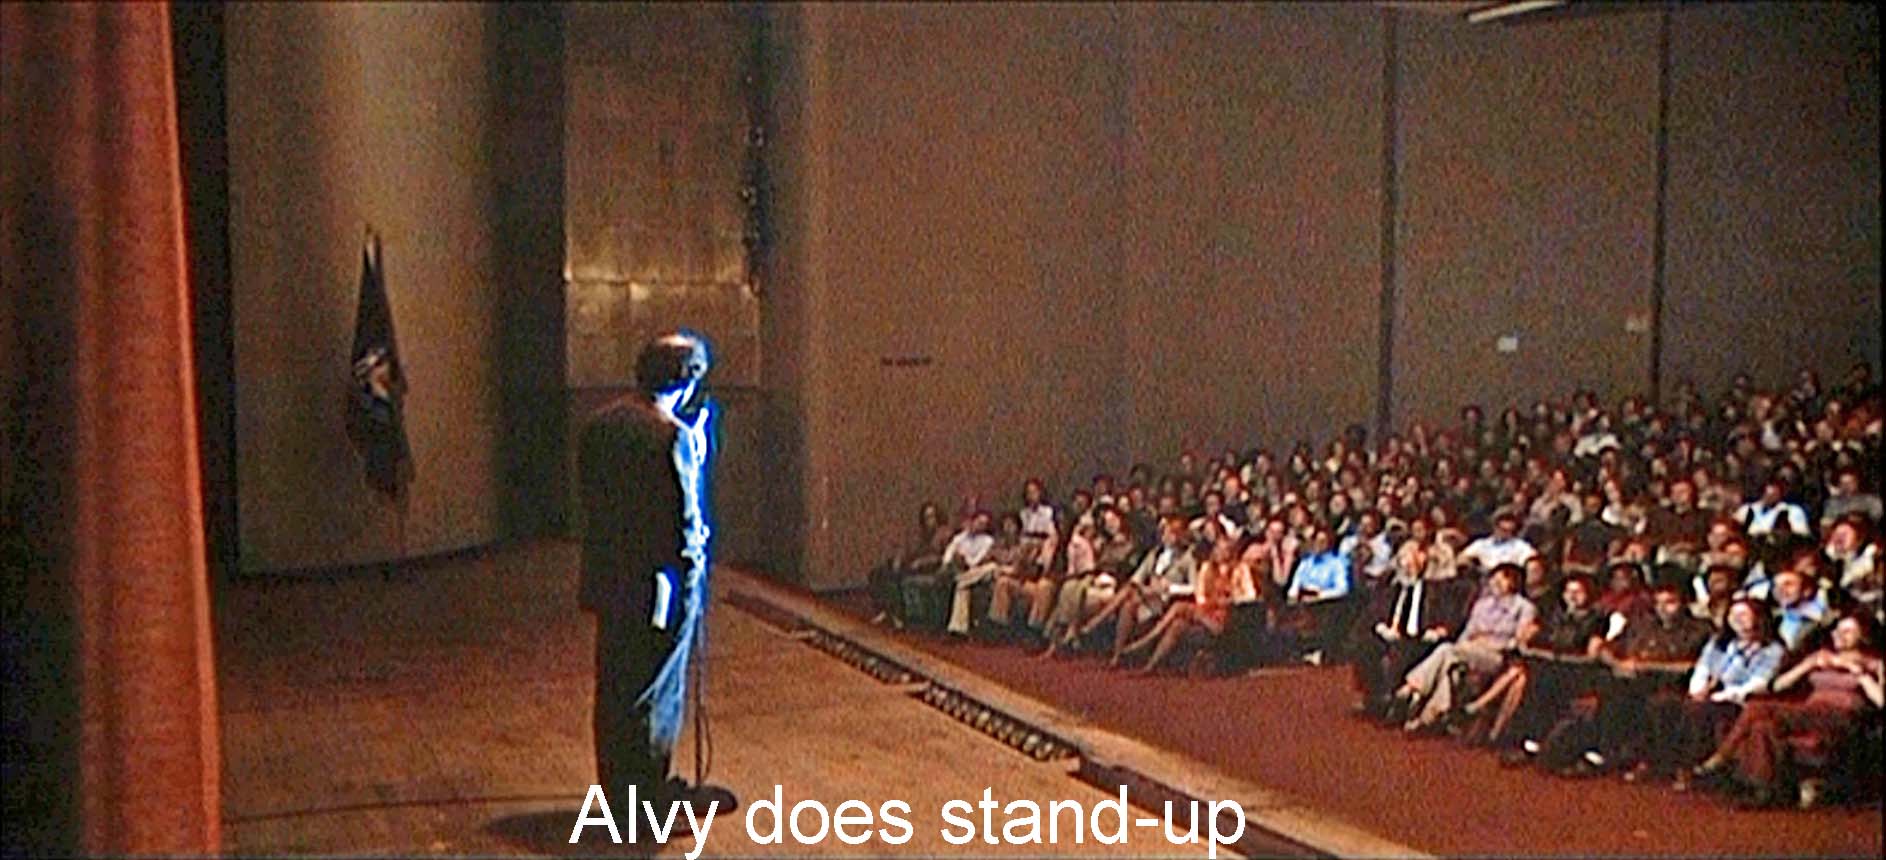  Alvy does stand-up